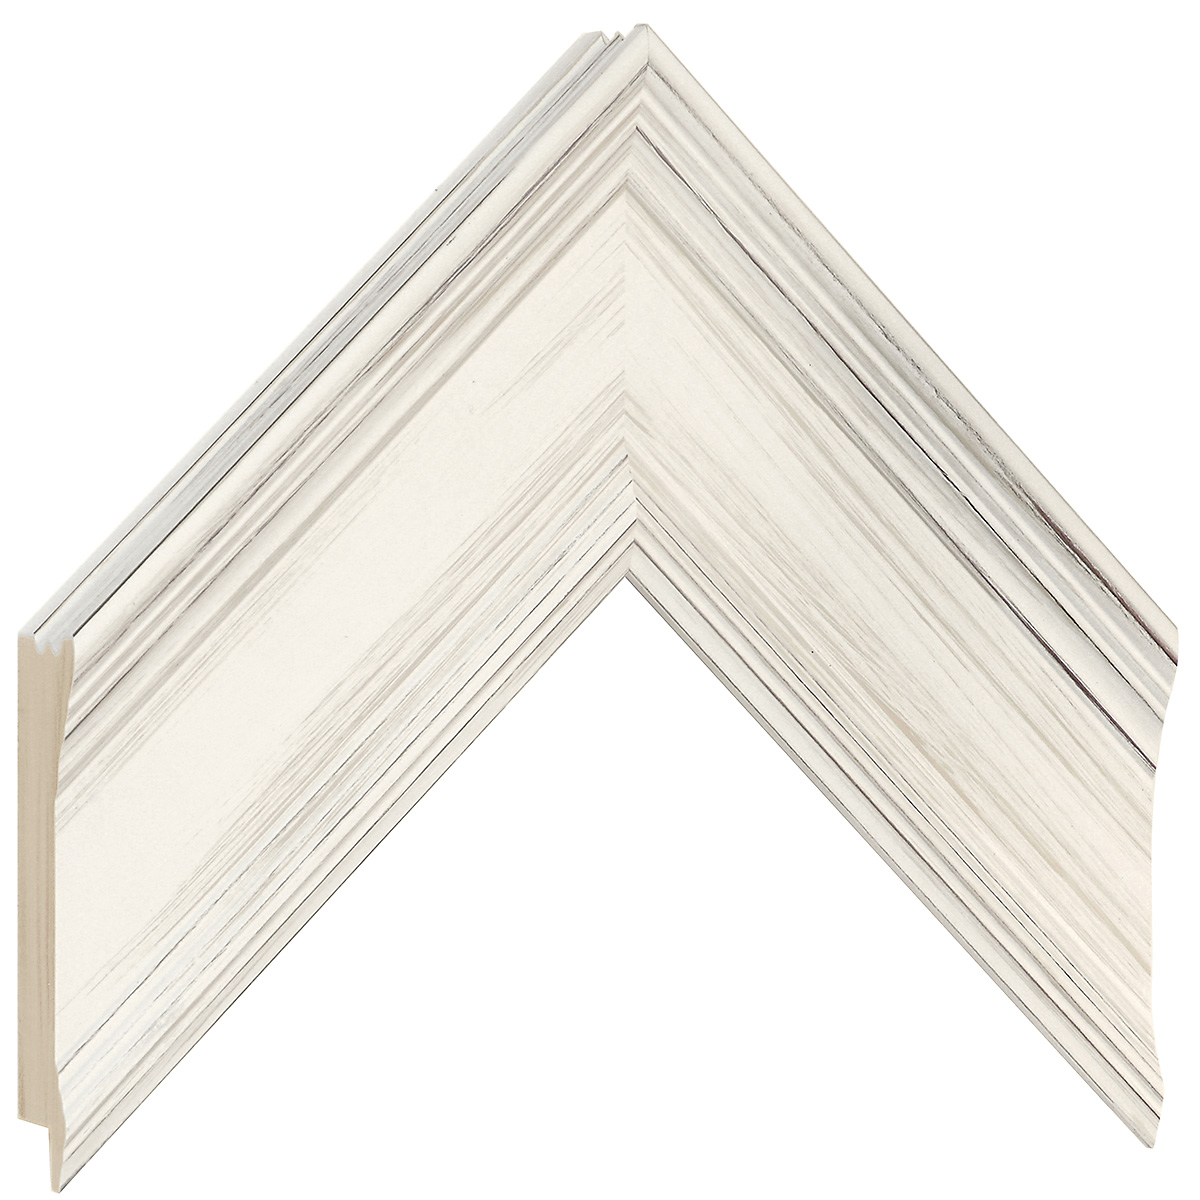 Moulding ayous jointed width 68mm height 30 - Cream finish - Sample